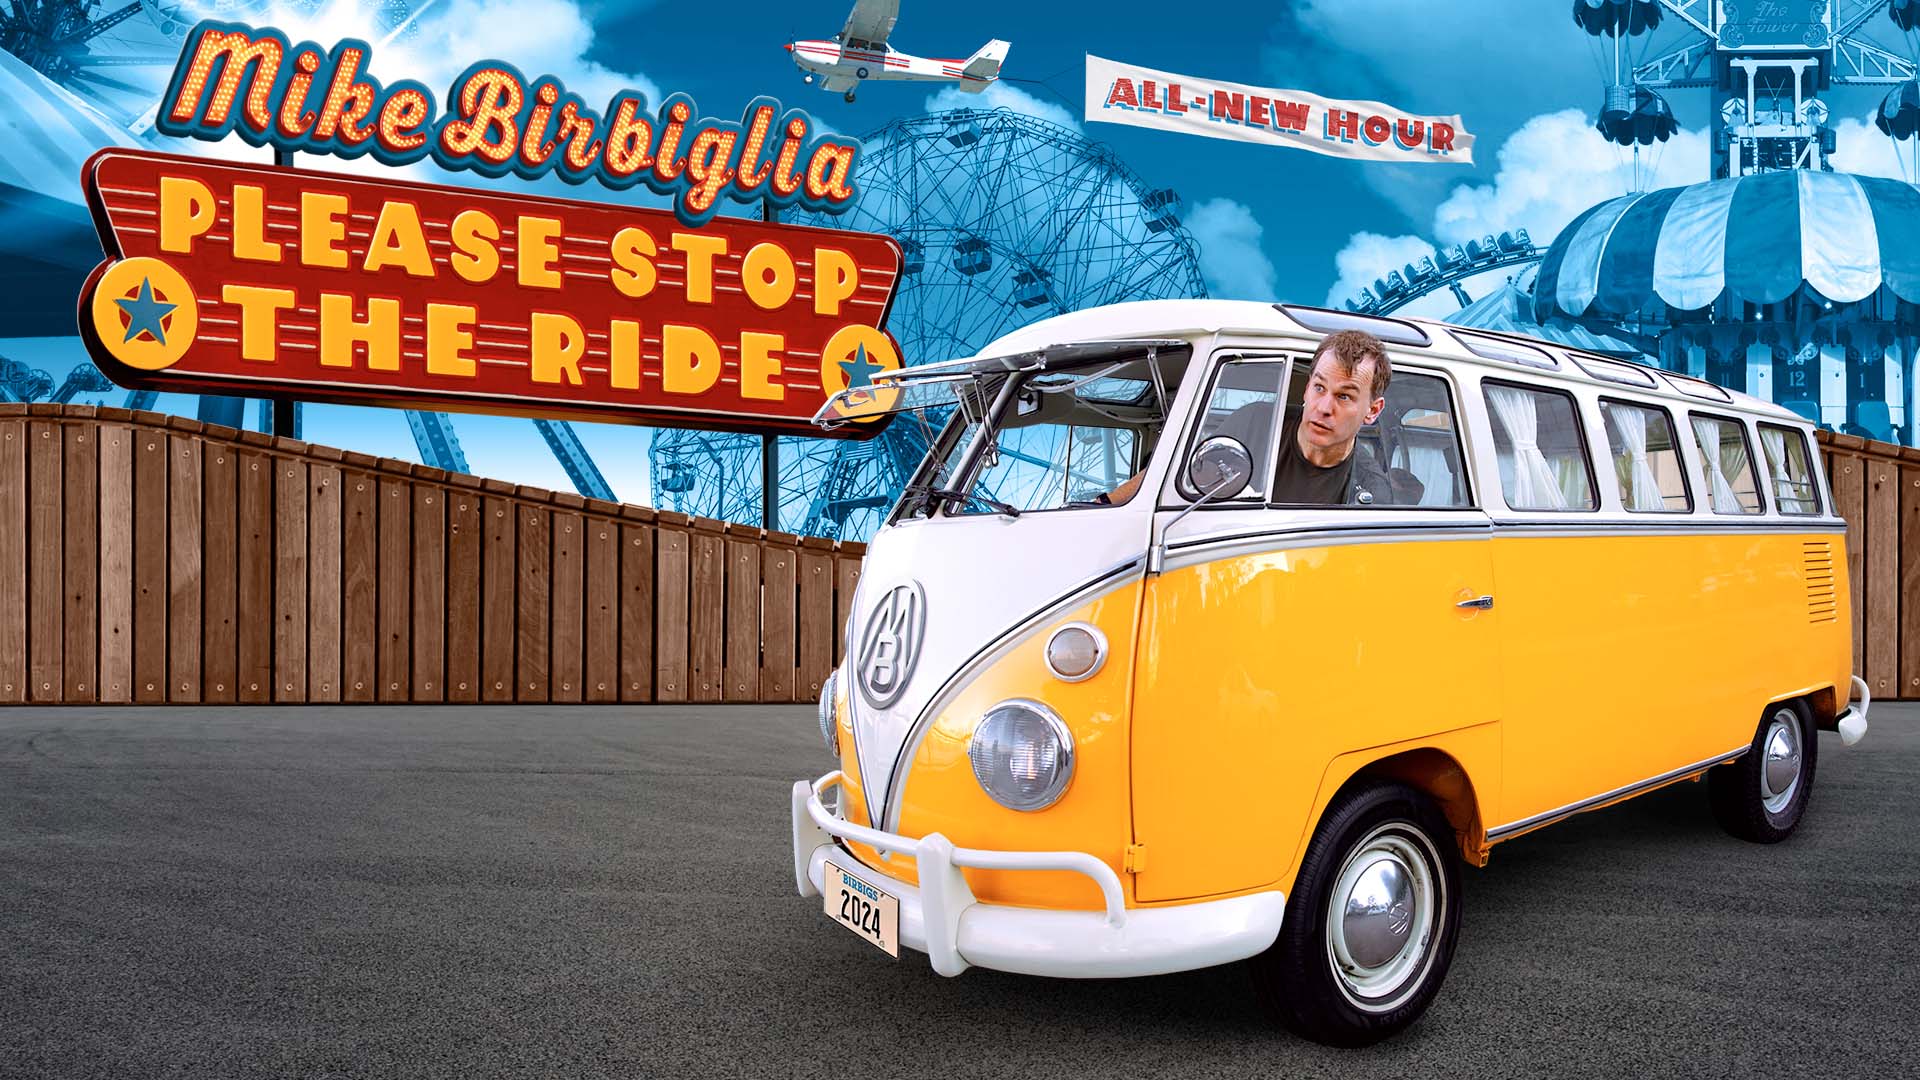 Banner text reads: "Mike Birbiglia Please Stop the Ride. All New Hour". Birbiglia, a middle aged white man with short brown hair sticks his head out of a yellow vintage Volkswagen bus. In the background there are a variety of carnival rides in a blue hue.